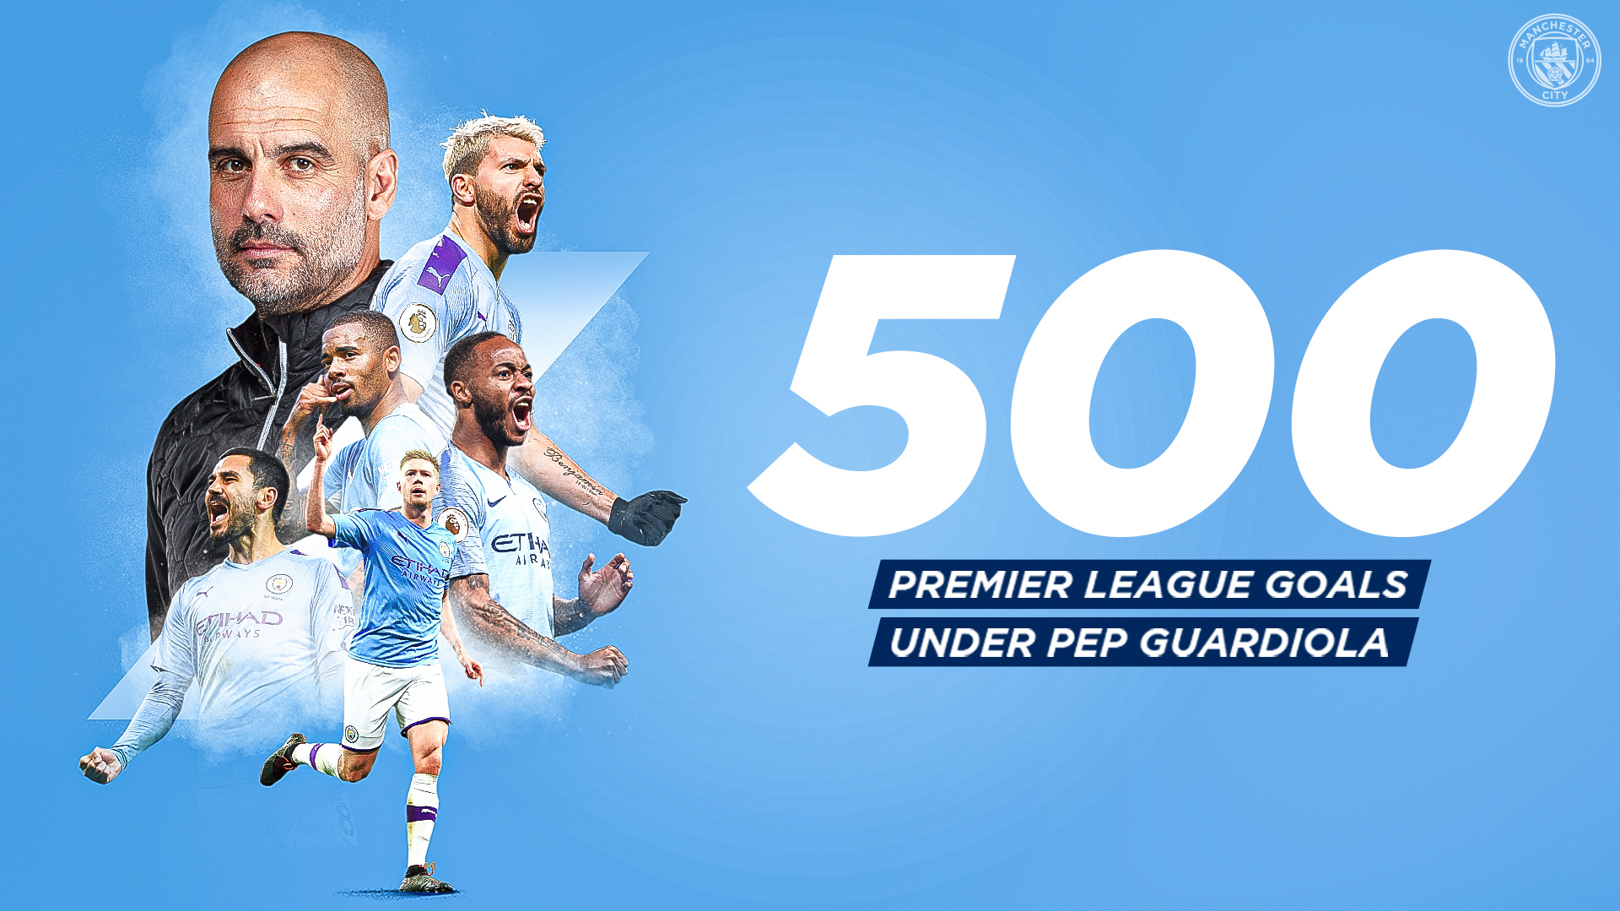 Guardiola becomes quickest manager to reach 500 Premier League goals 